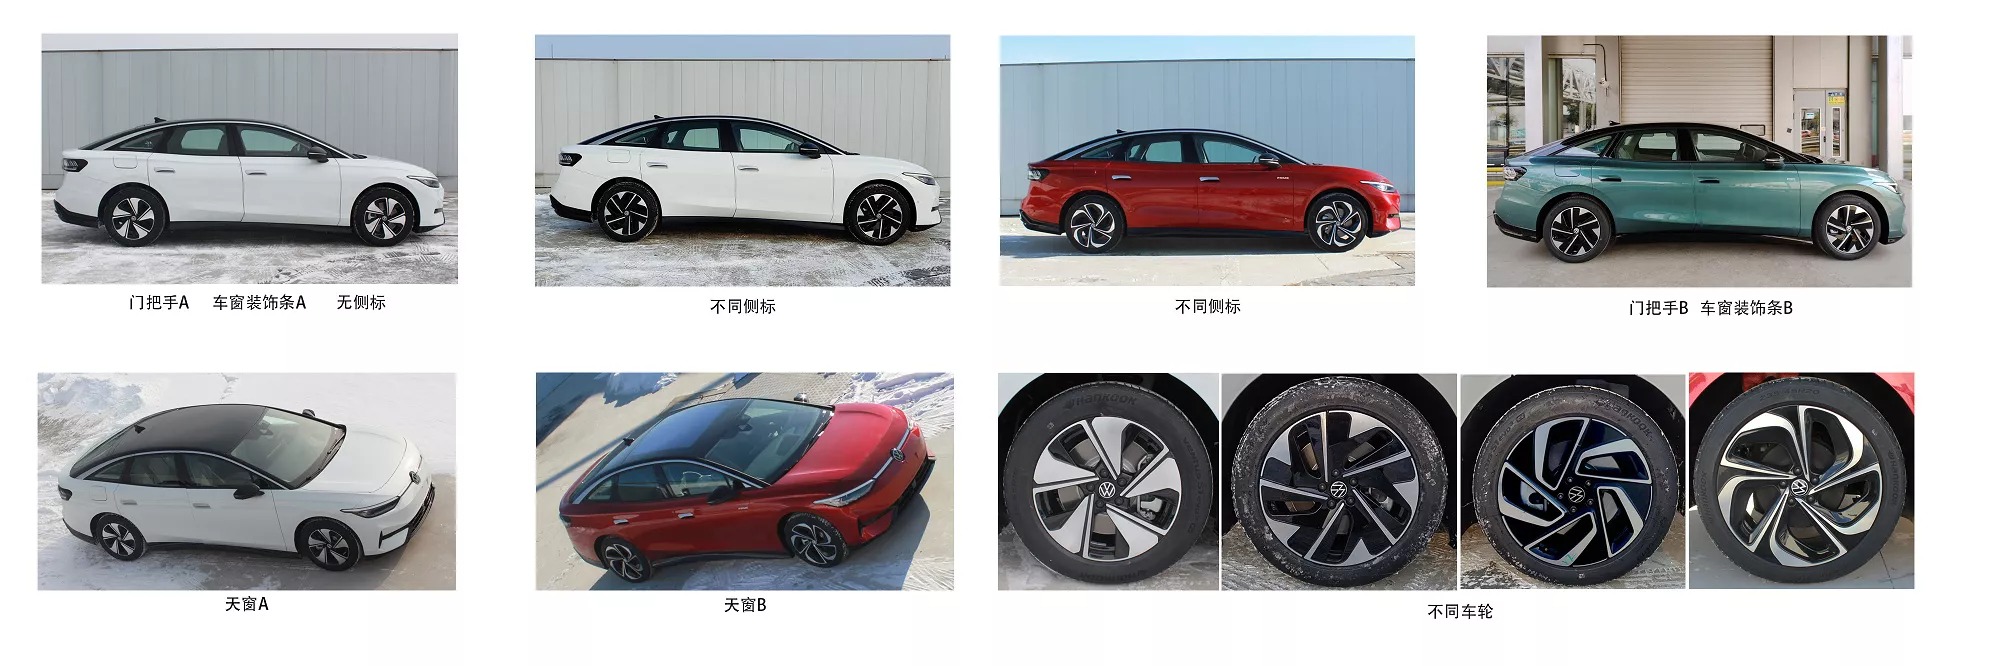 2024 VW ID7 3 2 - Volkswagen Unveils 2024 ID.7 Electric Sedan in China, Set to Compete with Tesla Model 3 as Upmarket Passat Alternative